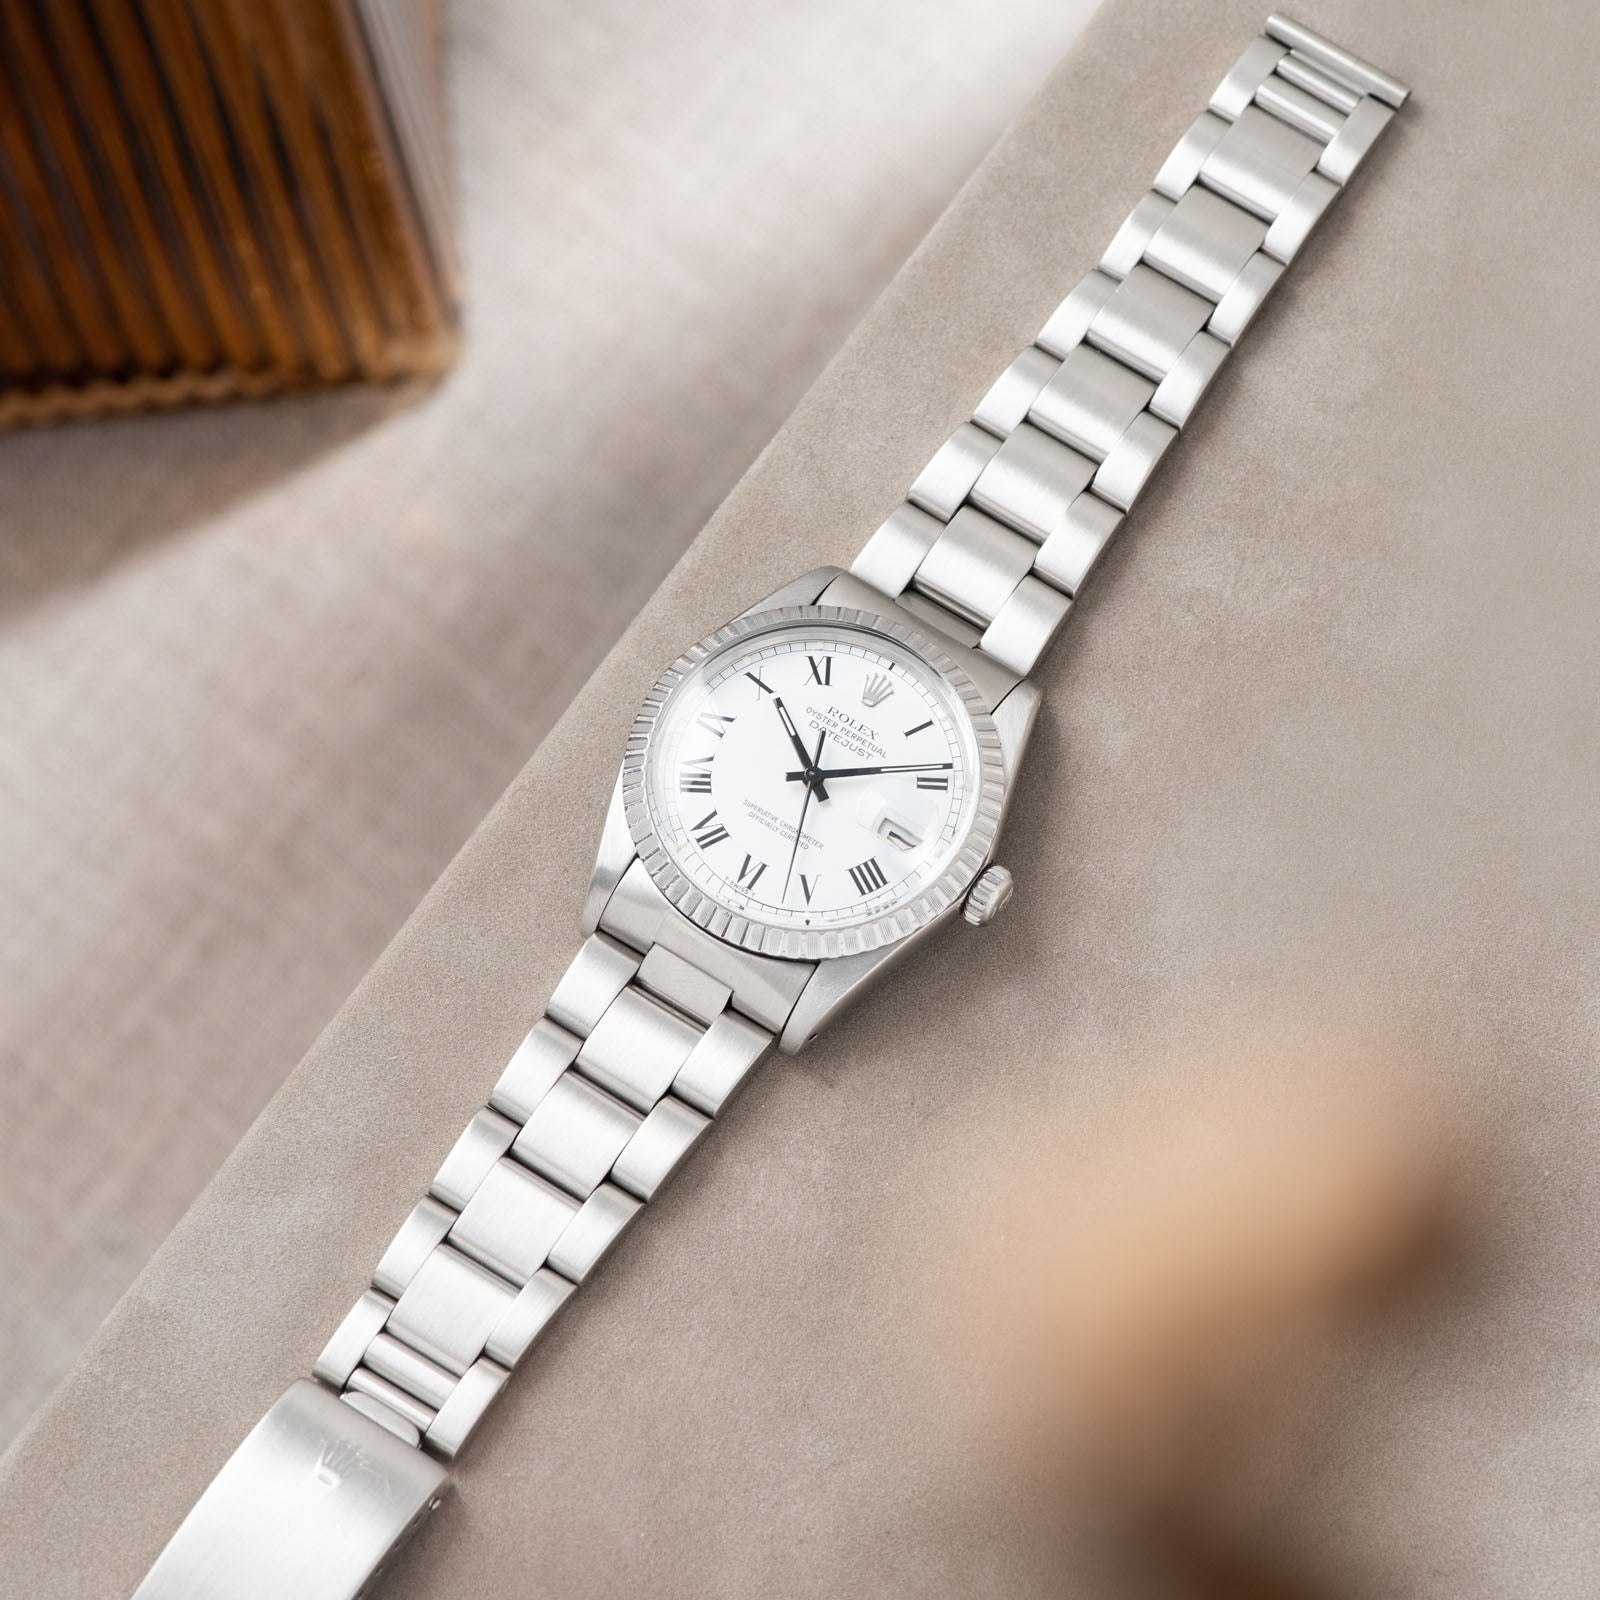 Rolex Datejust Reference 16030 White Buckley Dial 